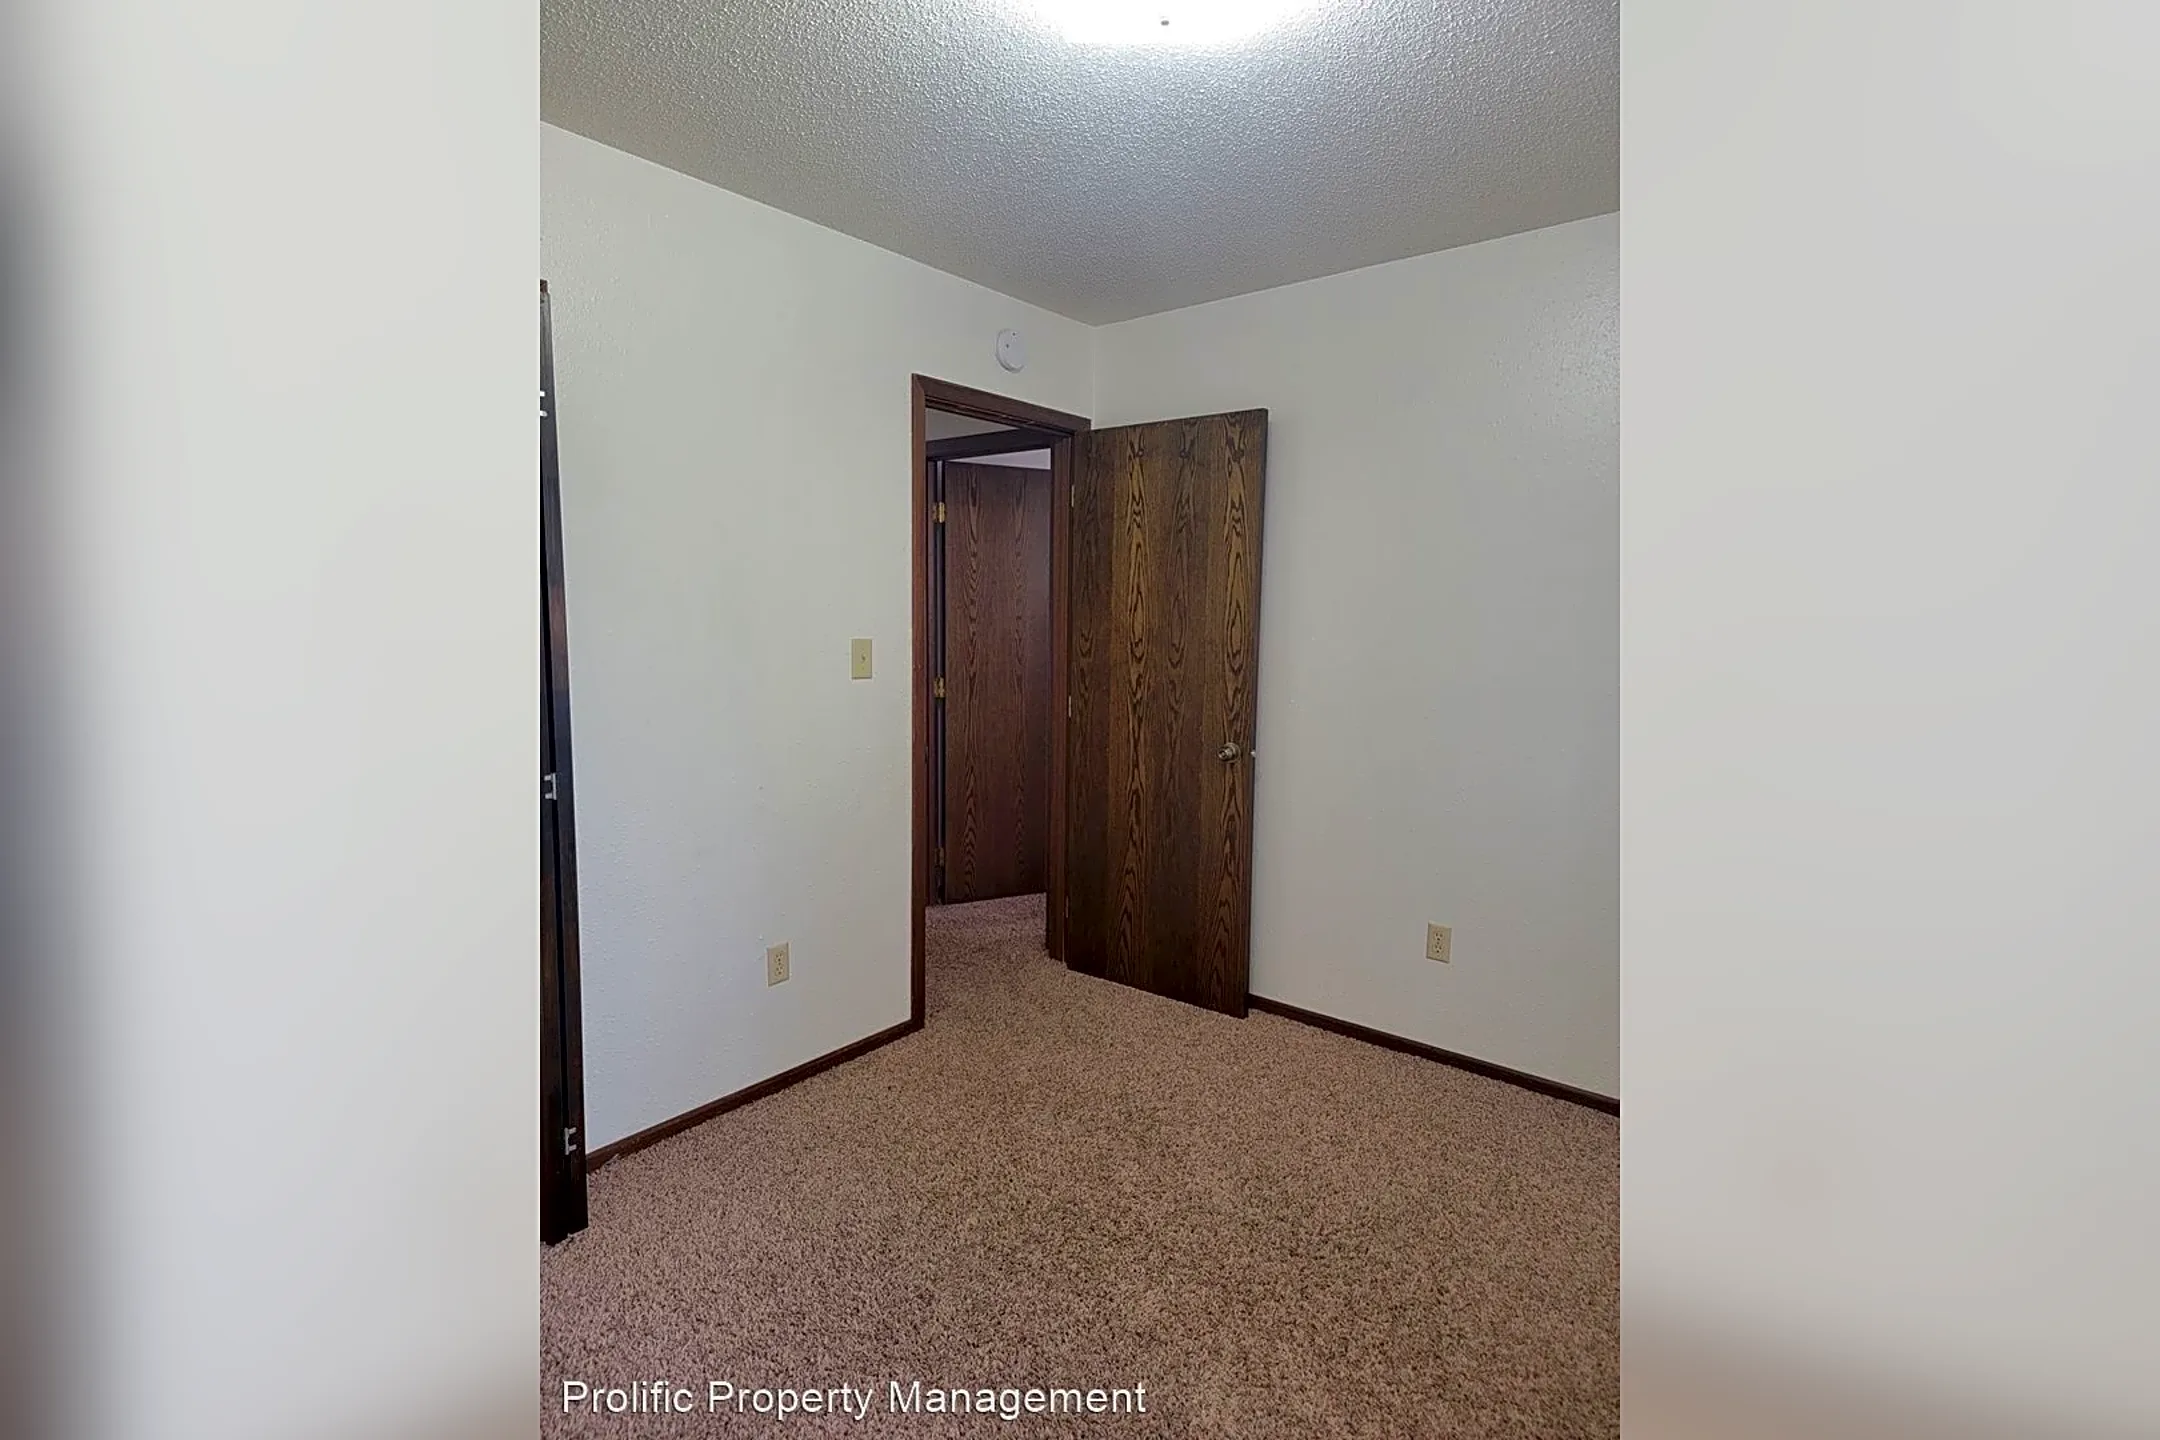 Bedroom - 1811 6th Ave SW - Jamestown, ND